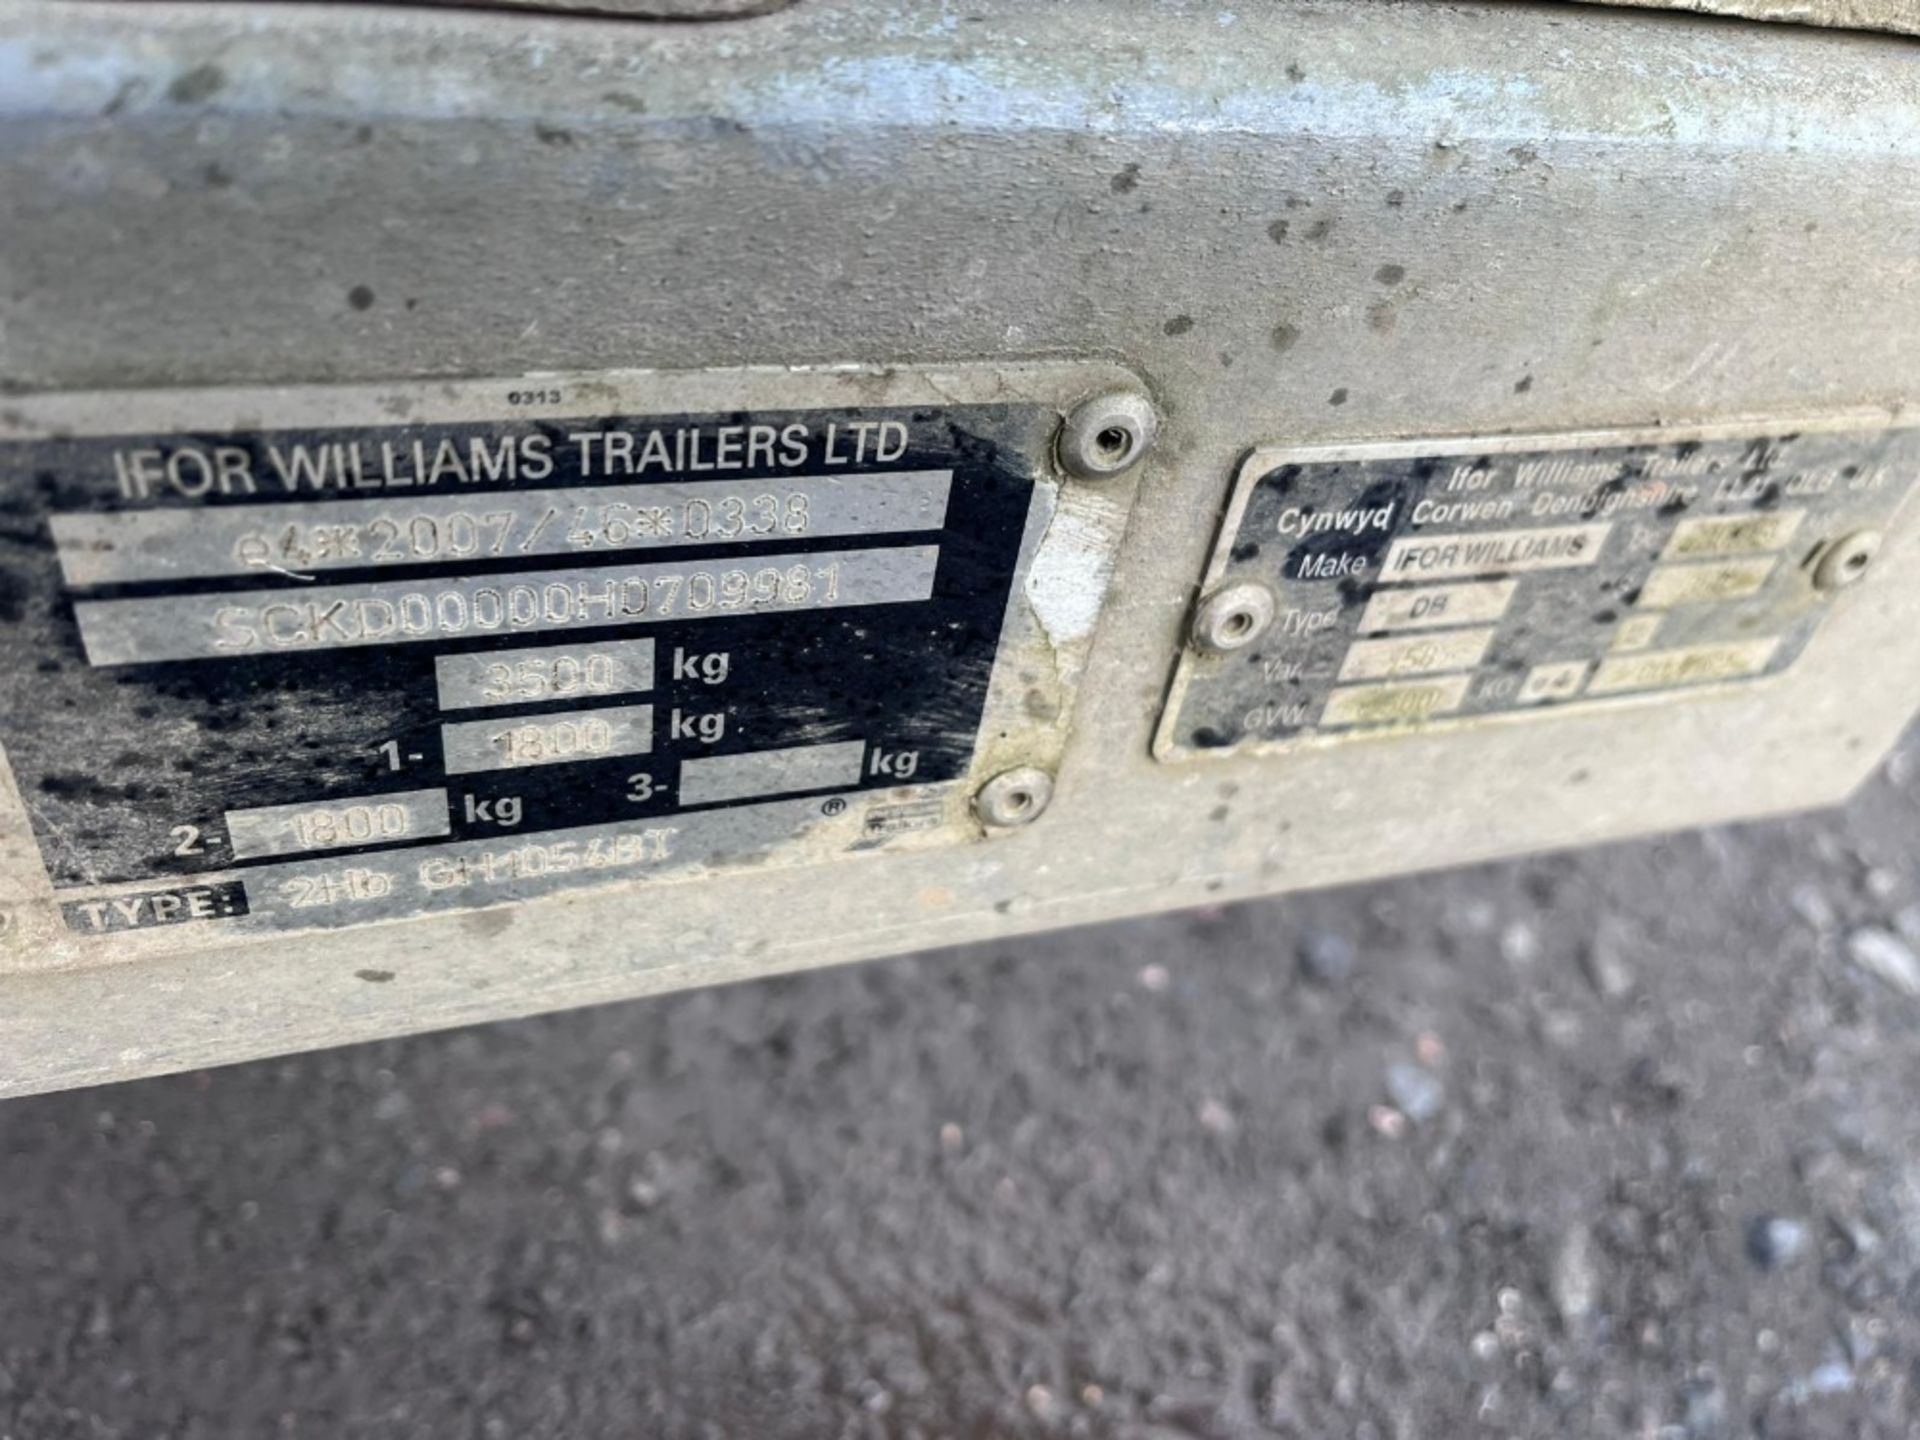 IFOR WILLIAMS GH1054BT 3.5 TON PLANT TRAILER BALL HITCH LED LIGHTS. FOR SALE DUE TO UPGRADE - Bild 7 aus 12